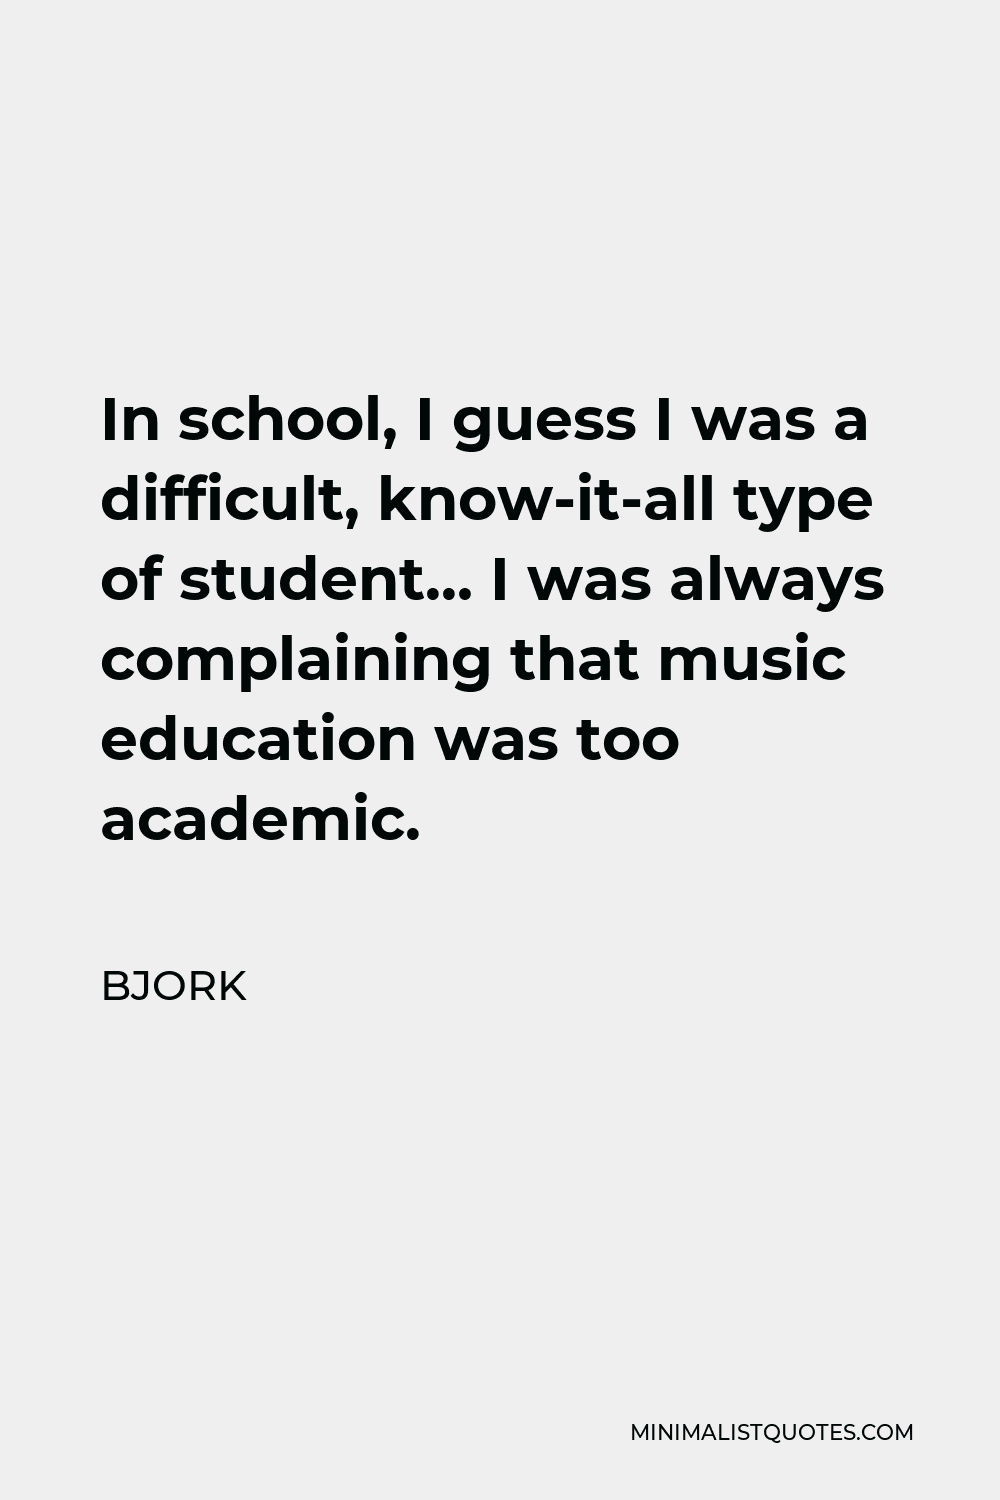 Bjork Quote - In school, I guess I was a difficult, know-it-all type of student… I was always complaining that music education was too academic.